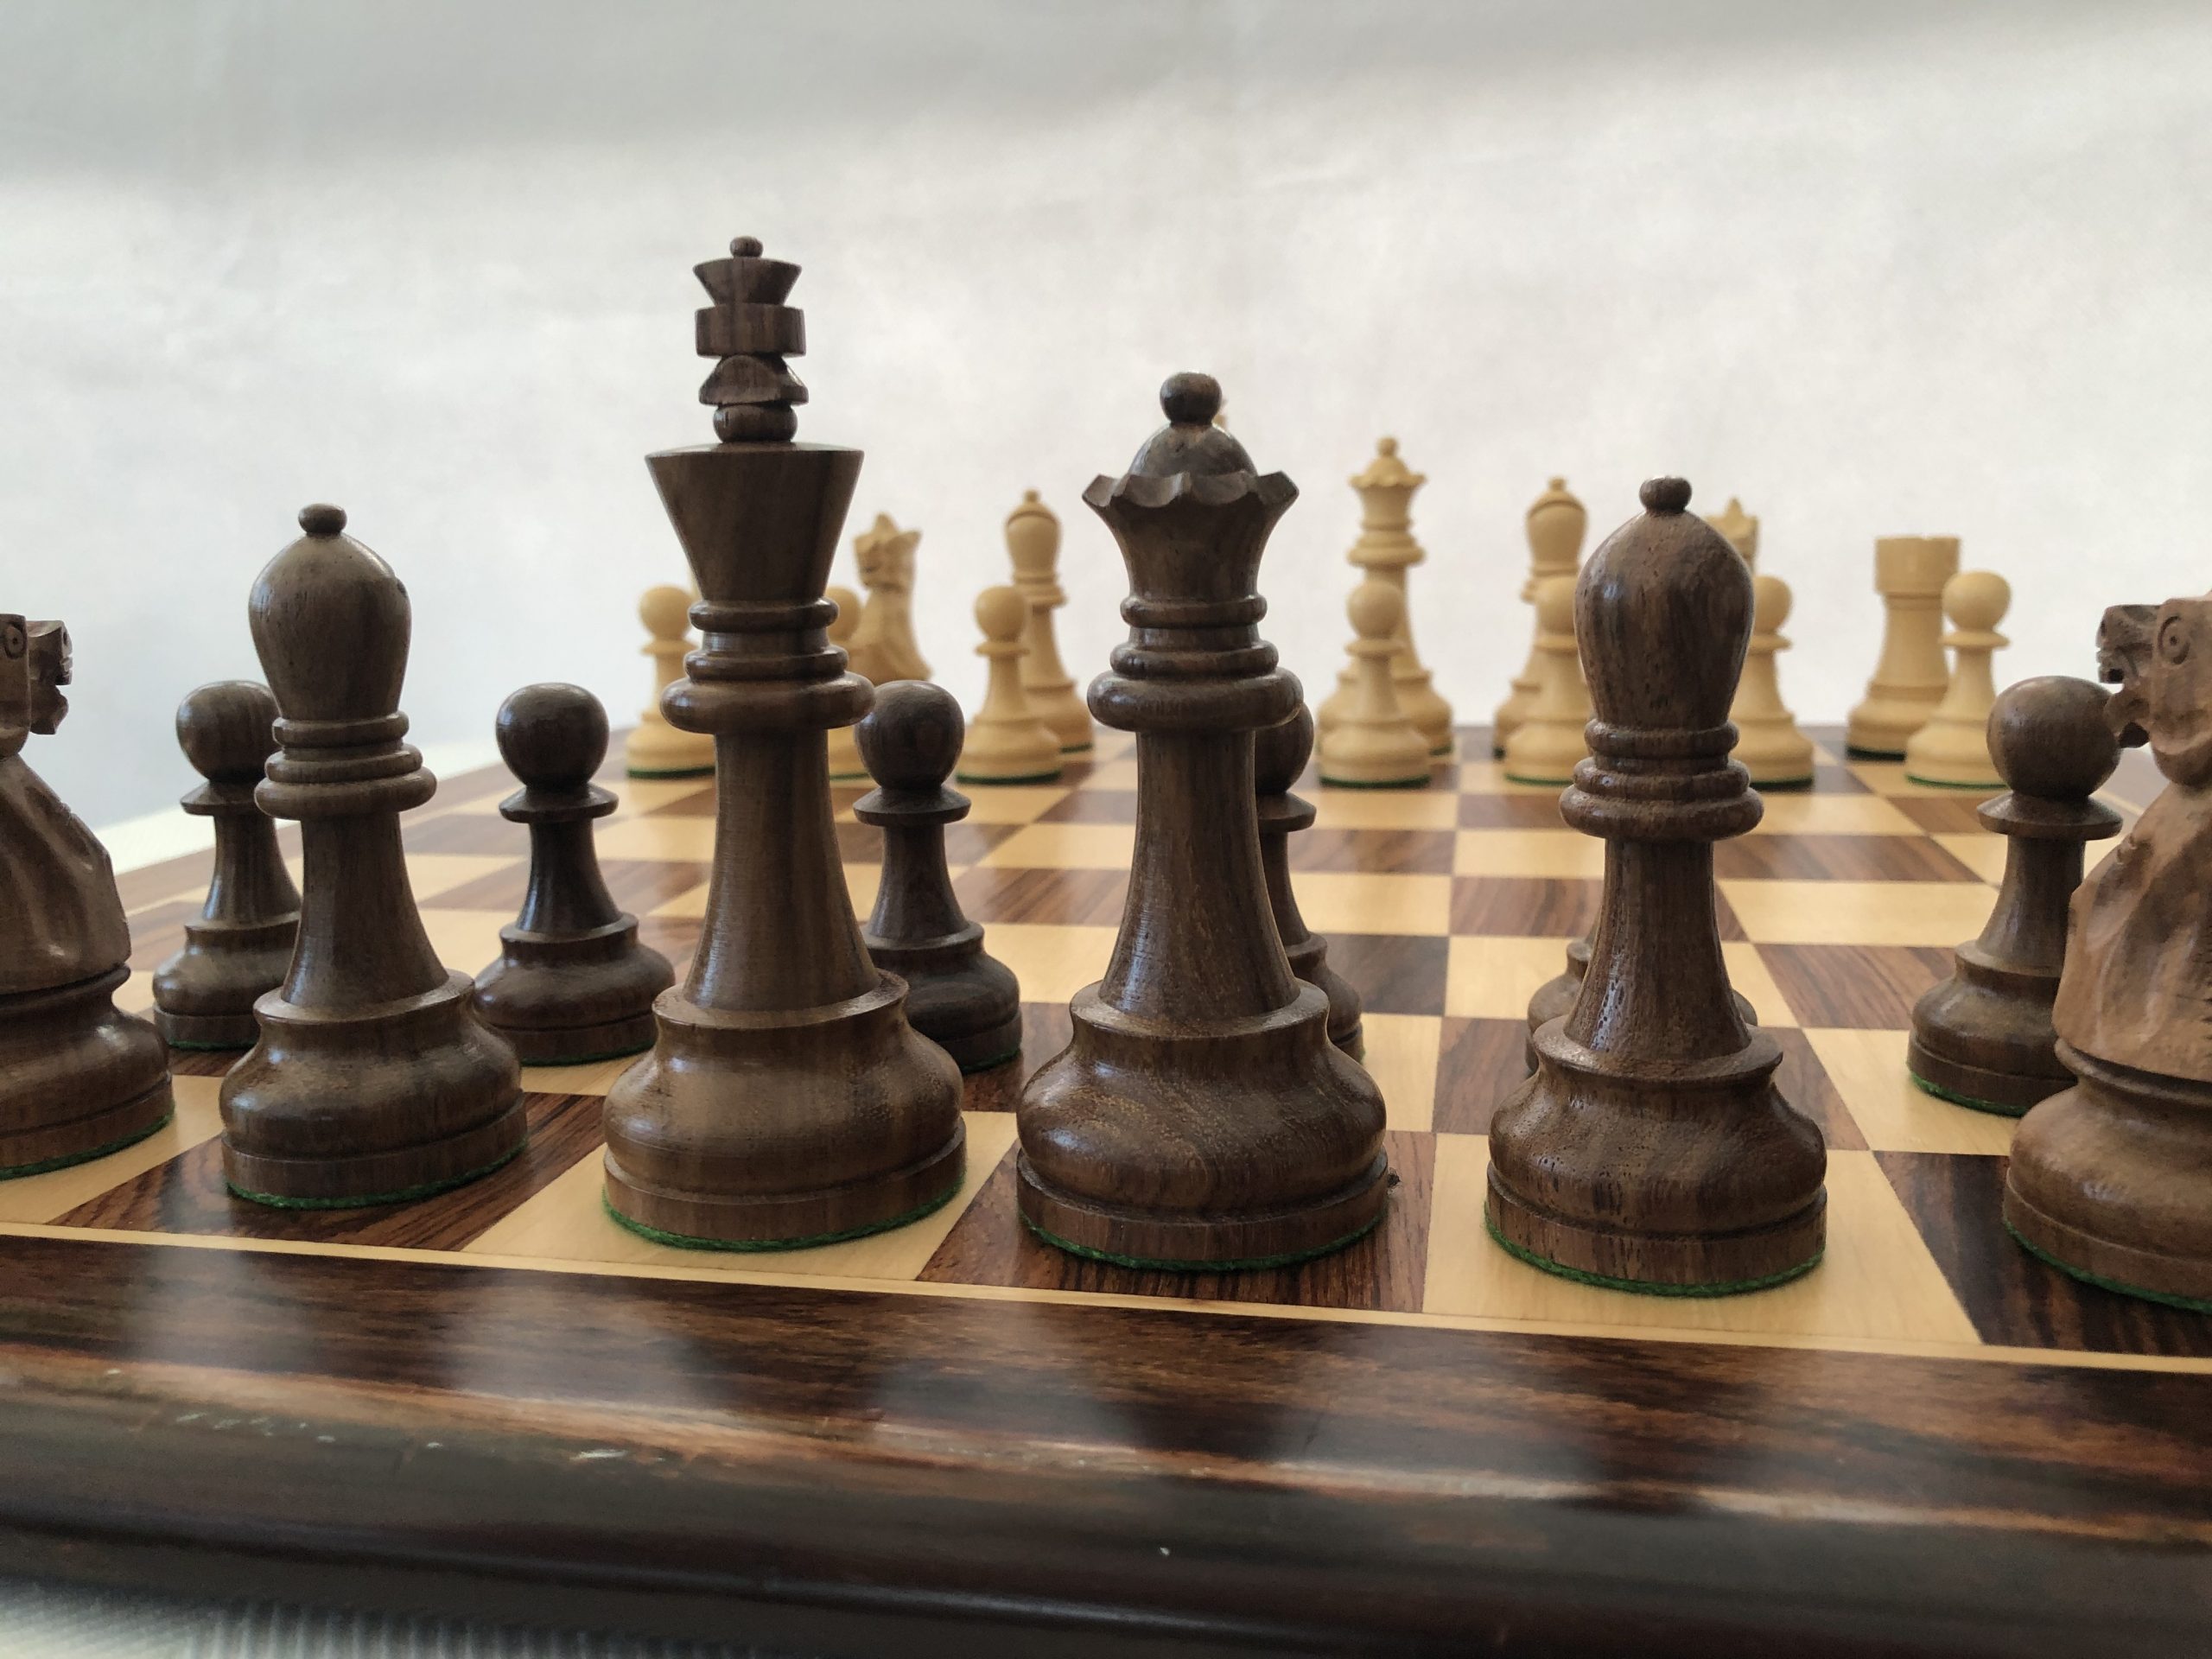 Combo of Knight & Pawns Chess Pieces in Bud Rosewood & Box